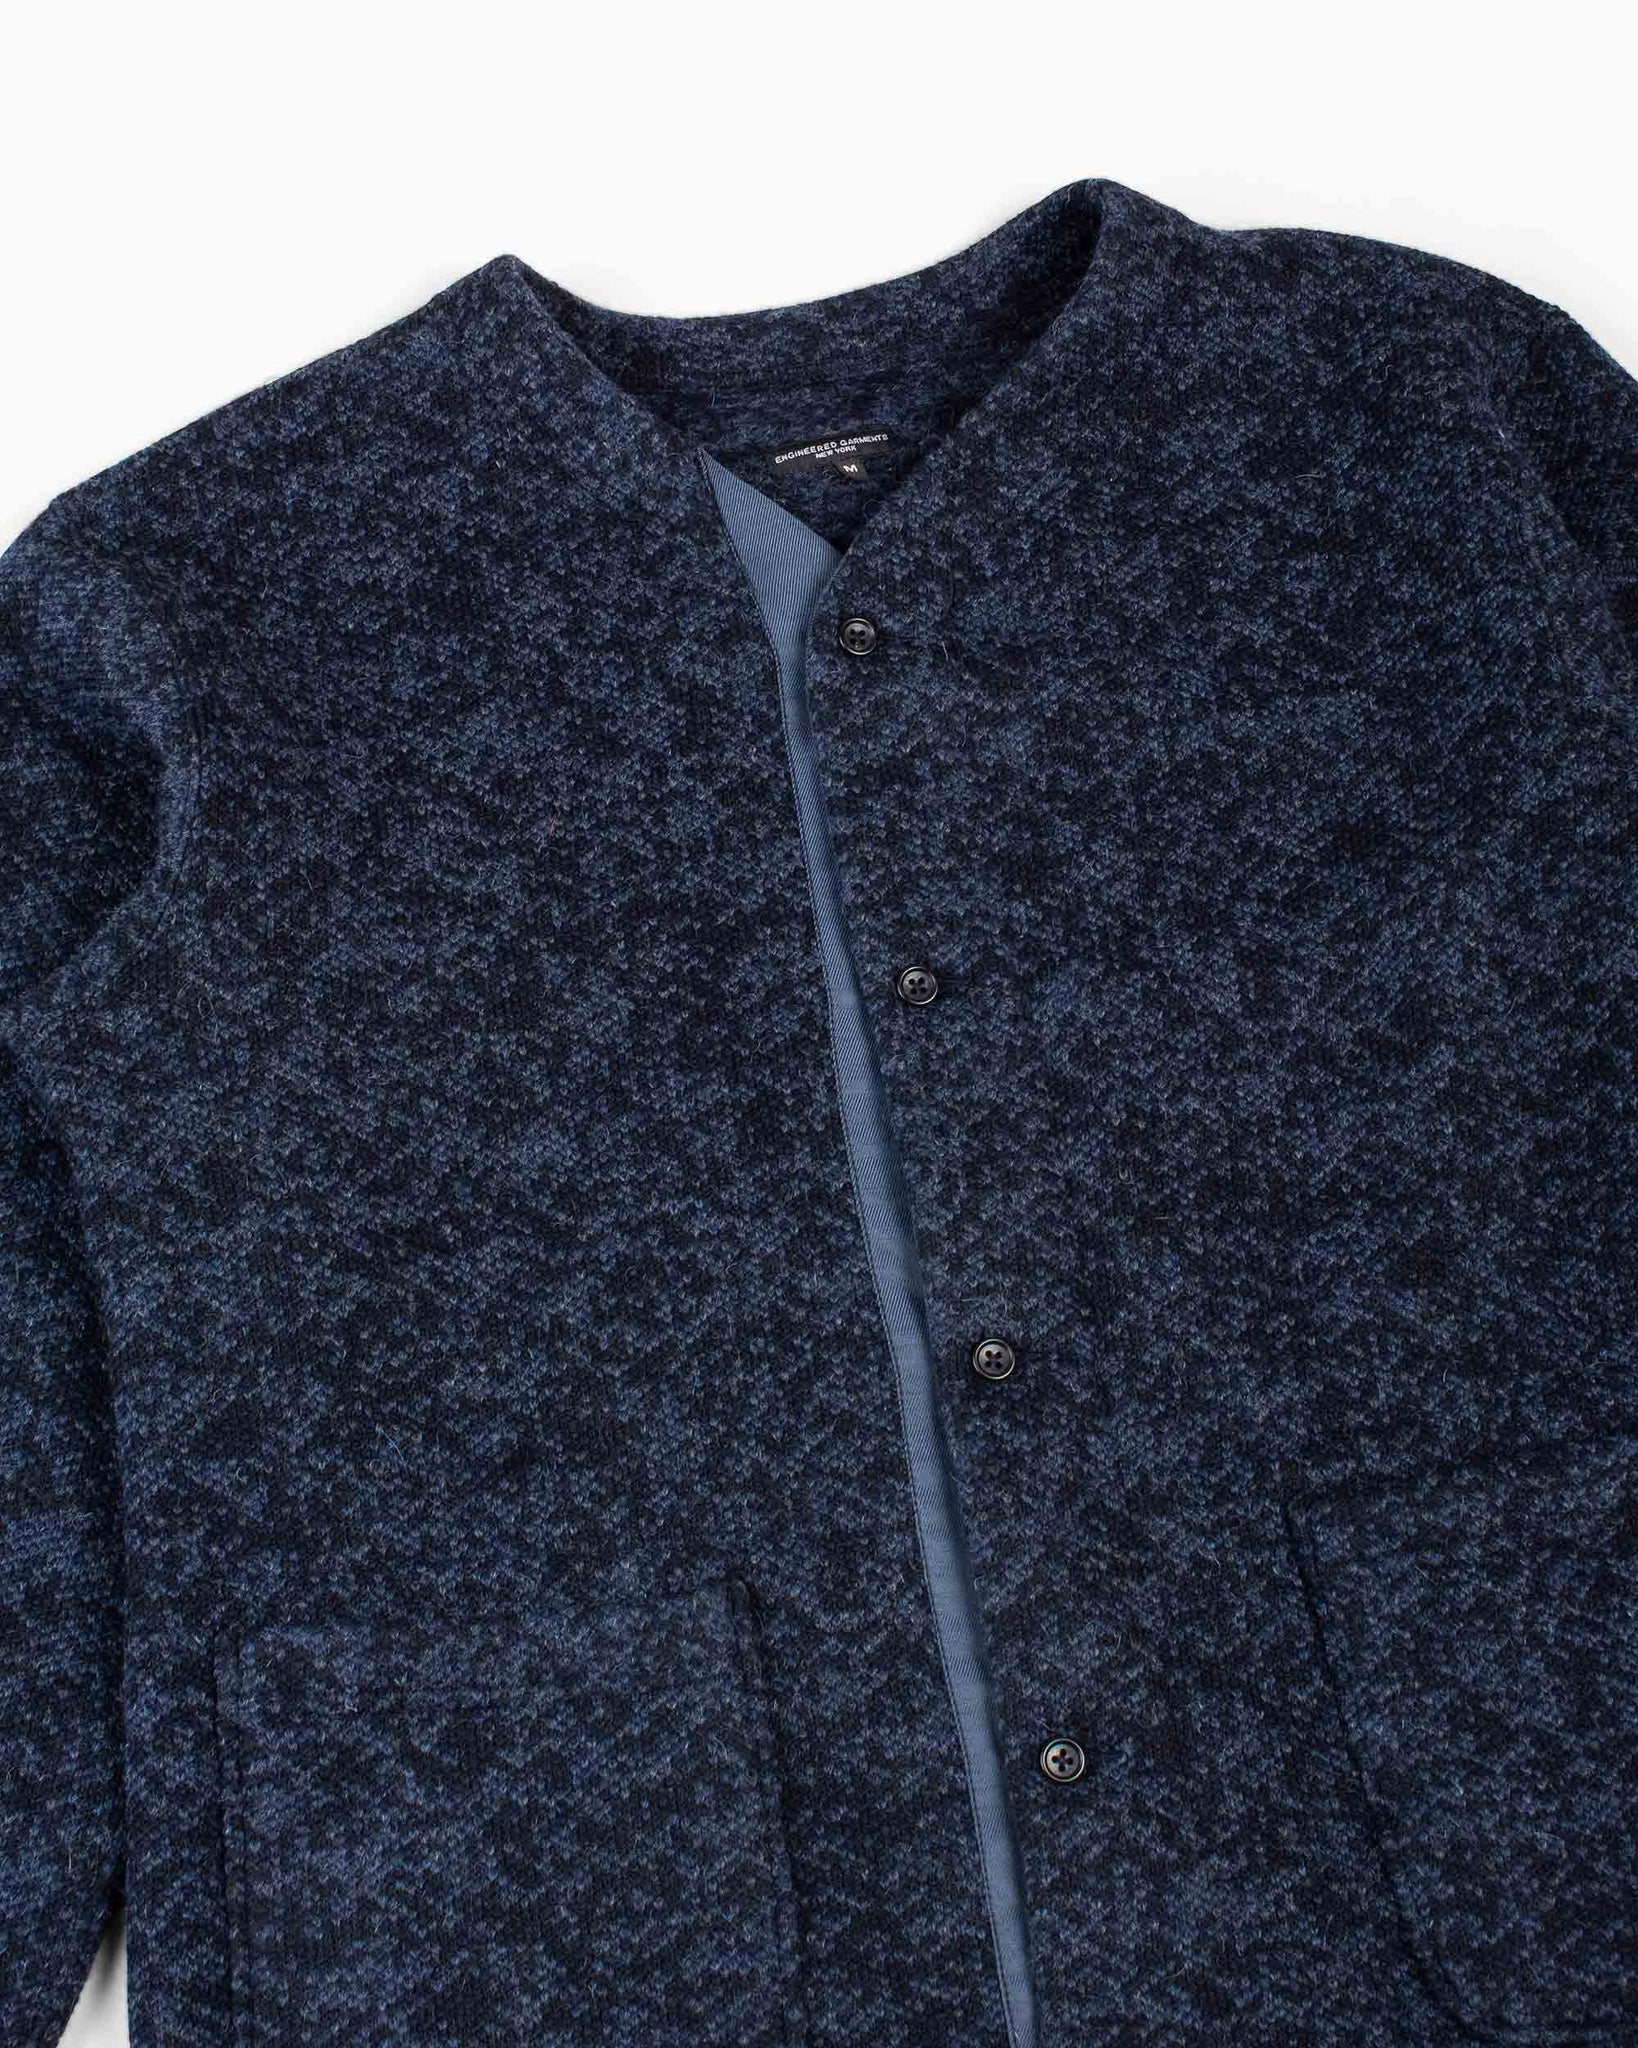 Engineered Garments Knit Cardigan Heather Navy Sweater Knit Details